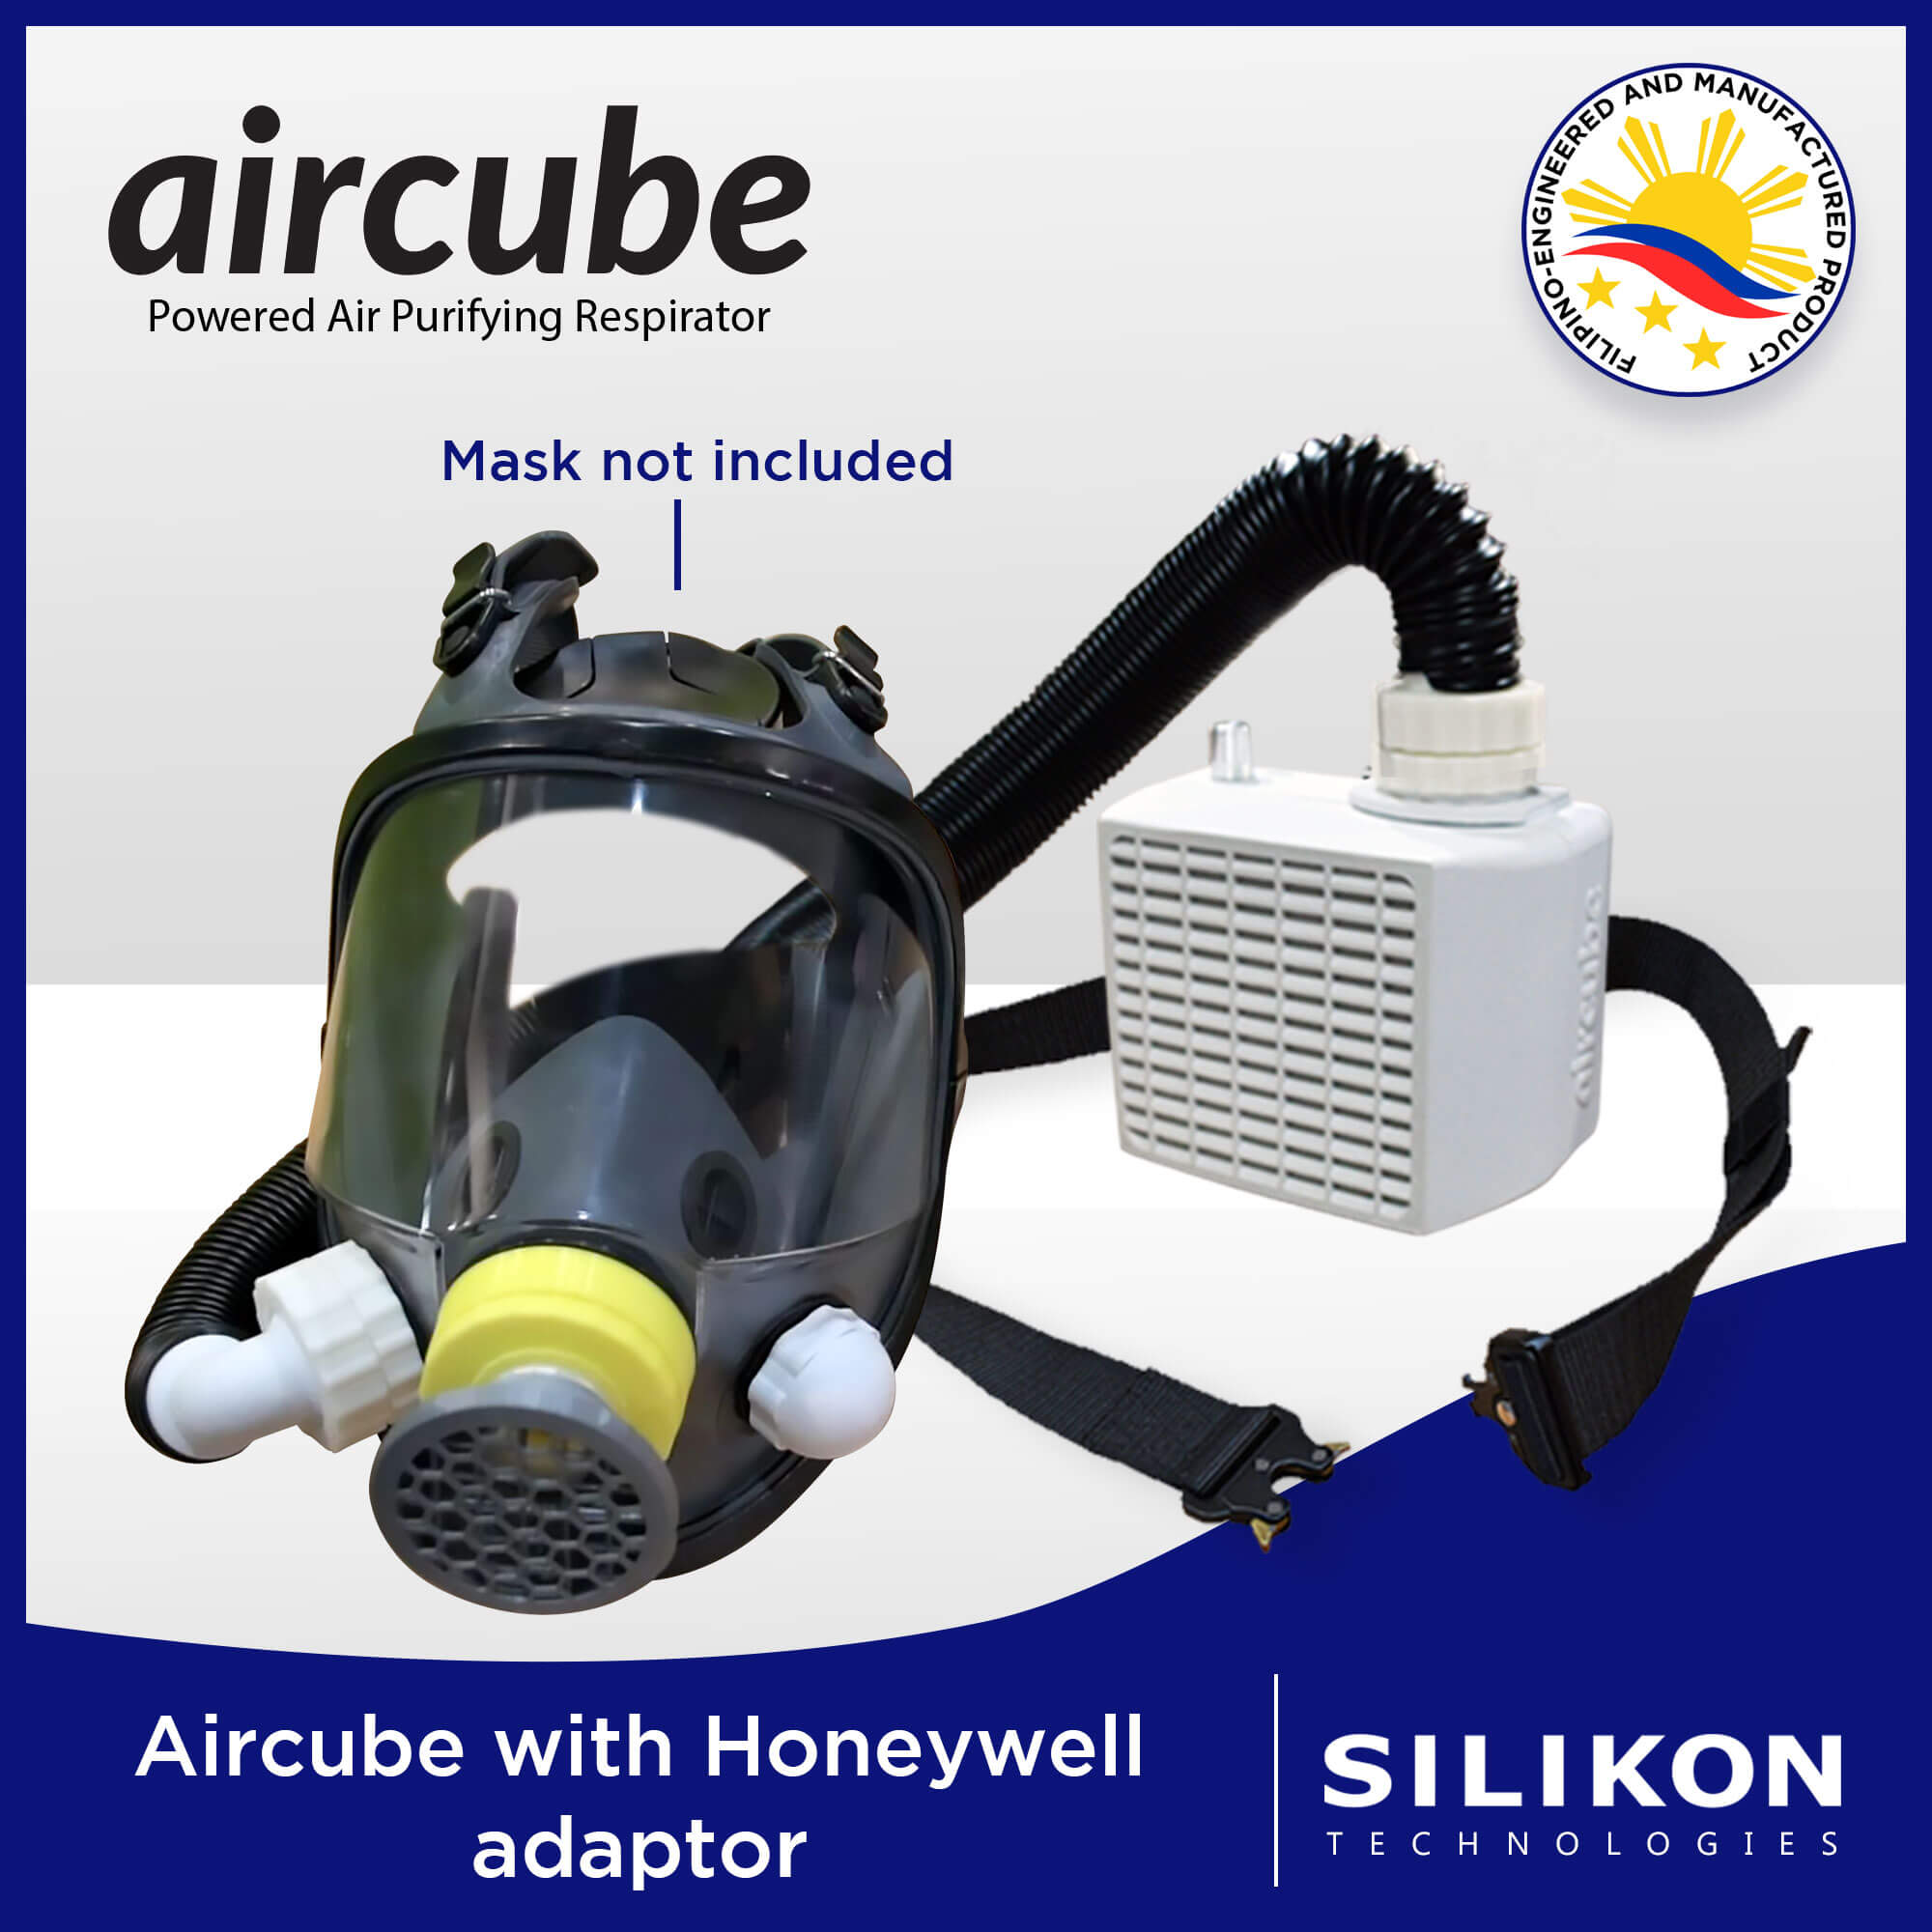 Powered Air Purifying Respirator (PAPR) Aircube with Honeywell adaptor ...